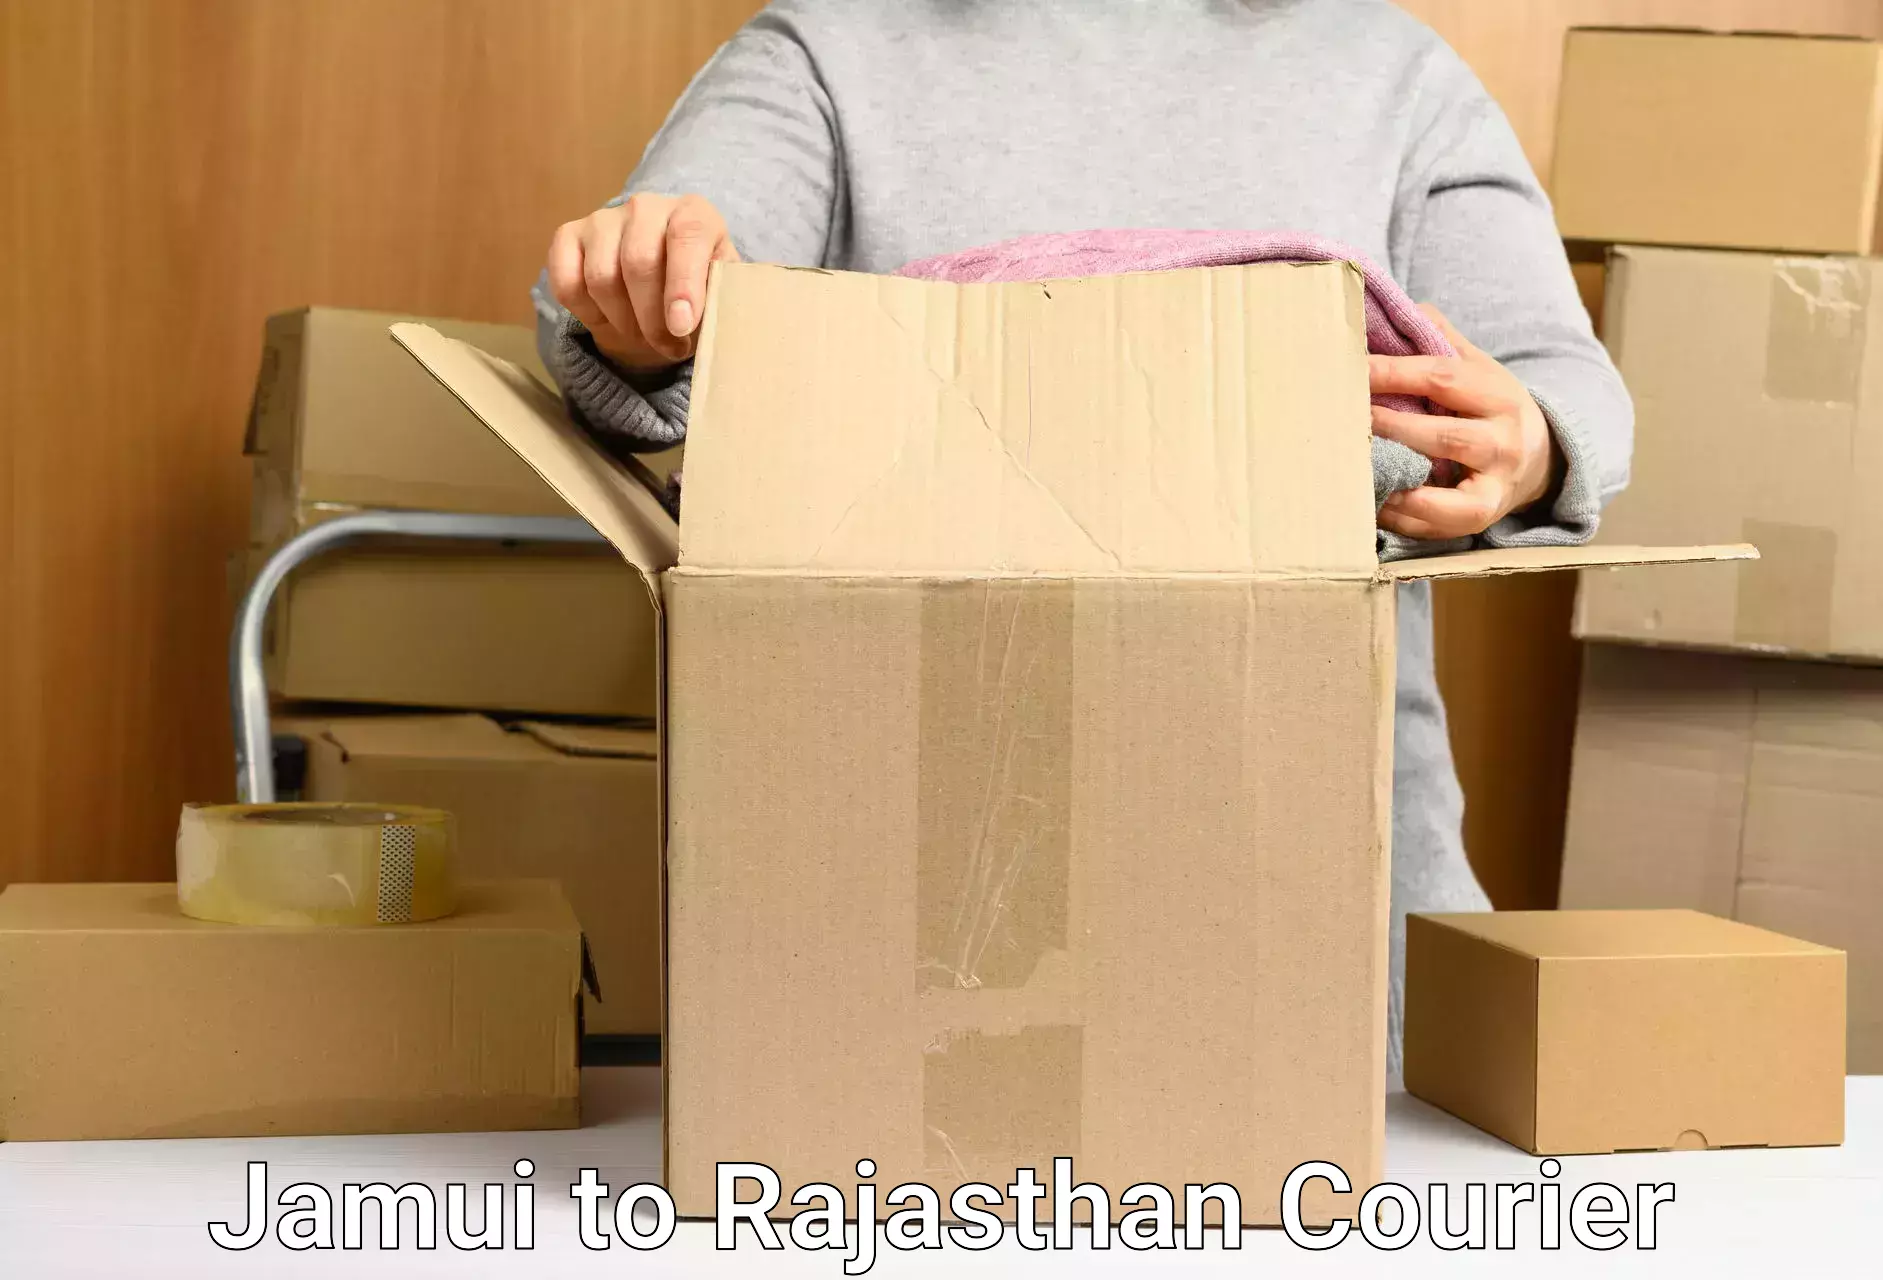 Urgent courier needs Jamui to Yeswanthapur